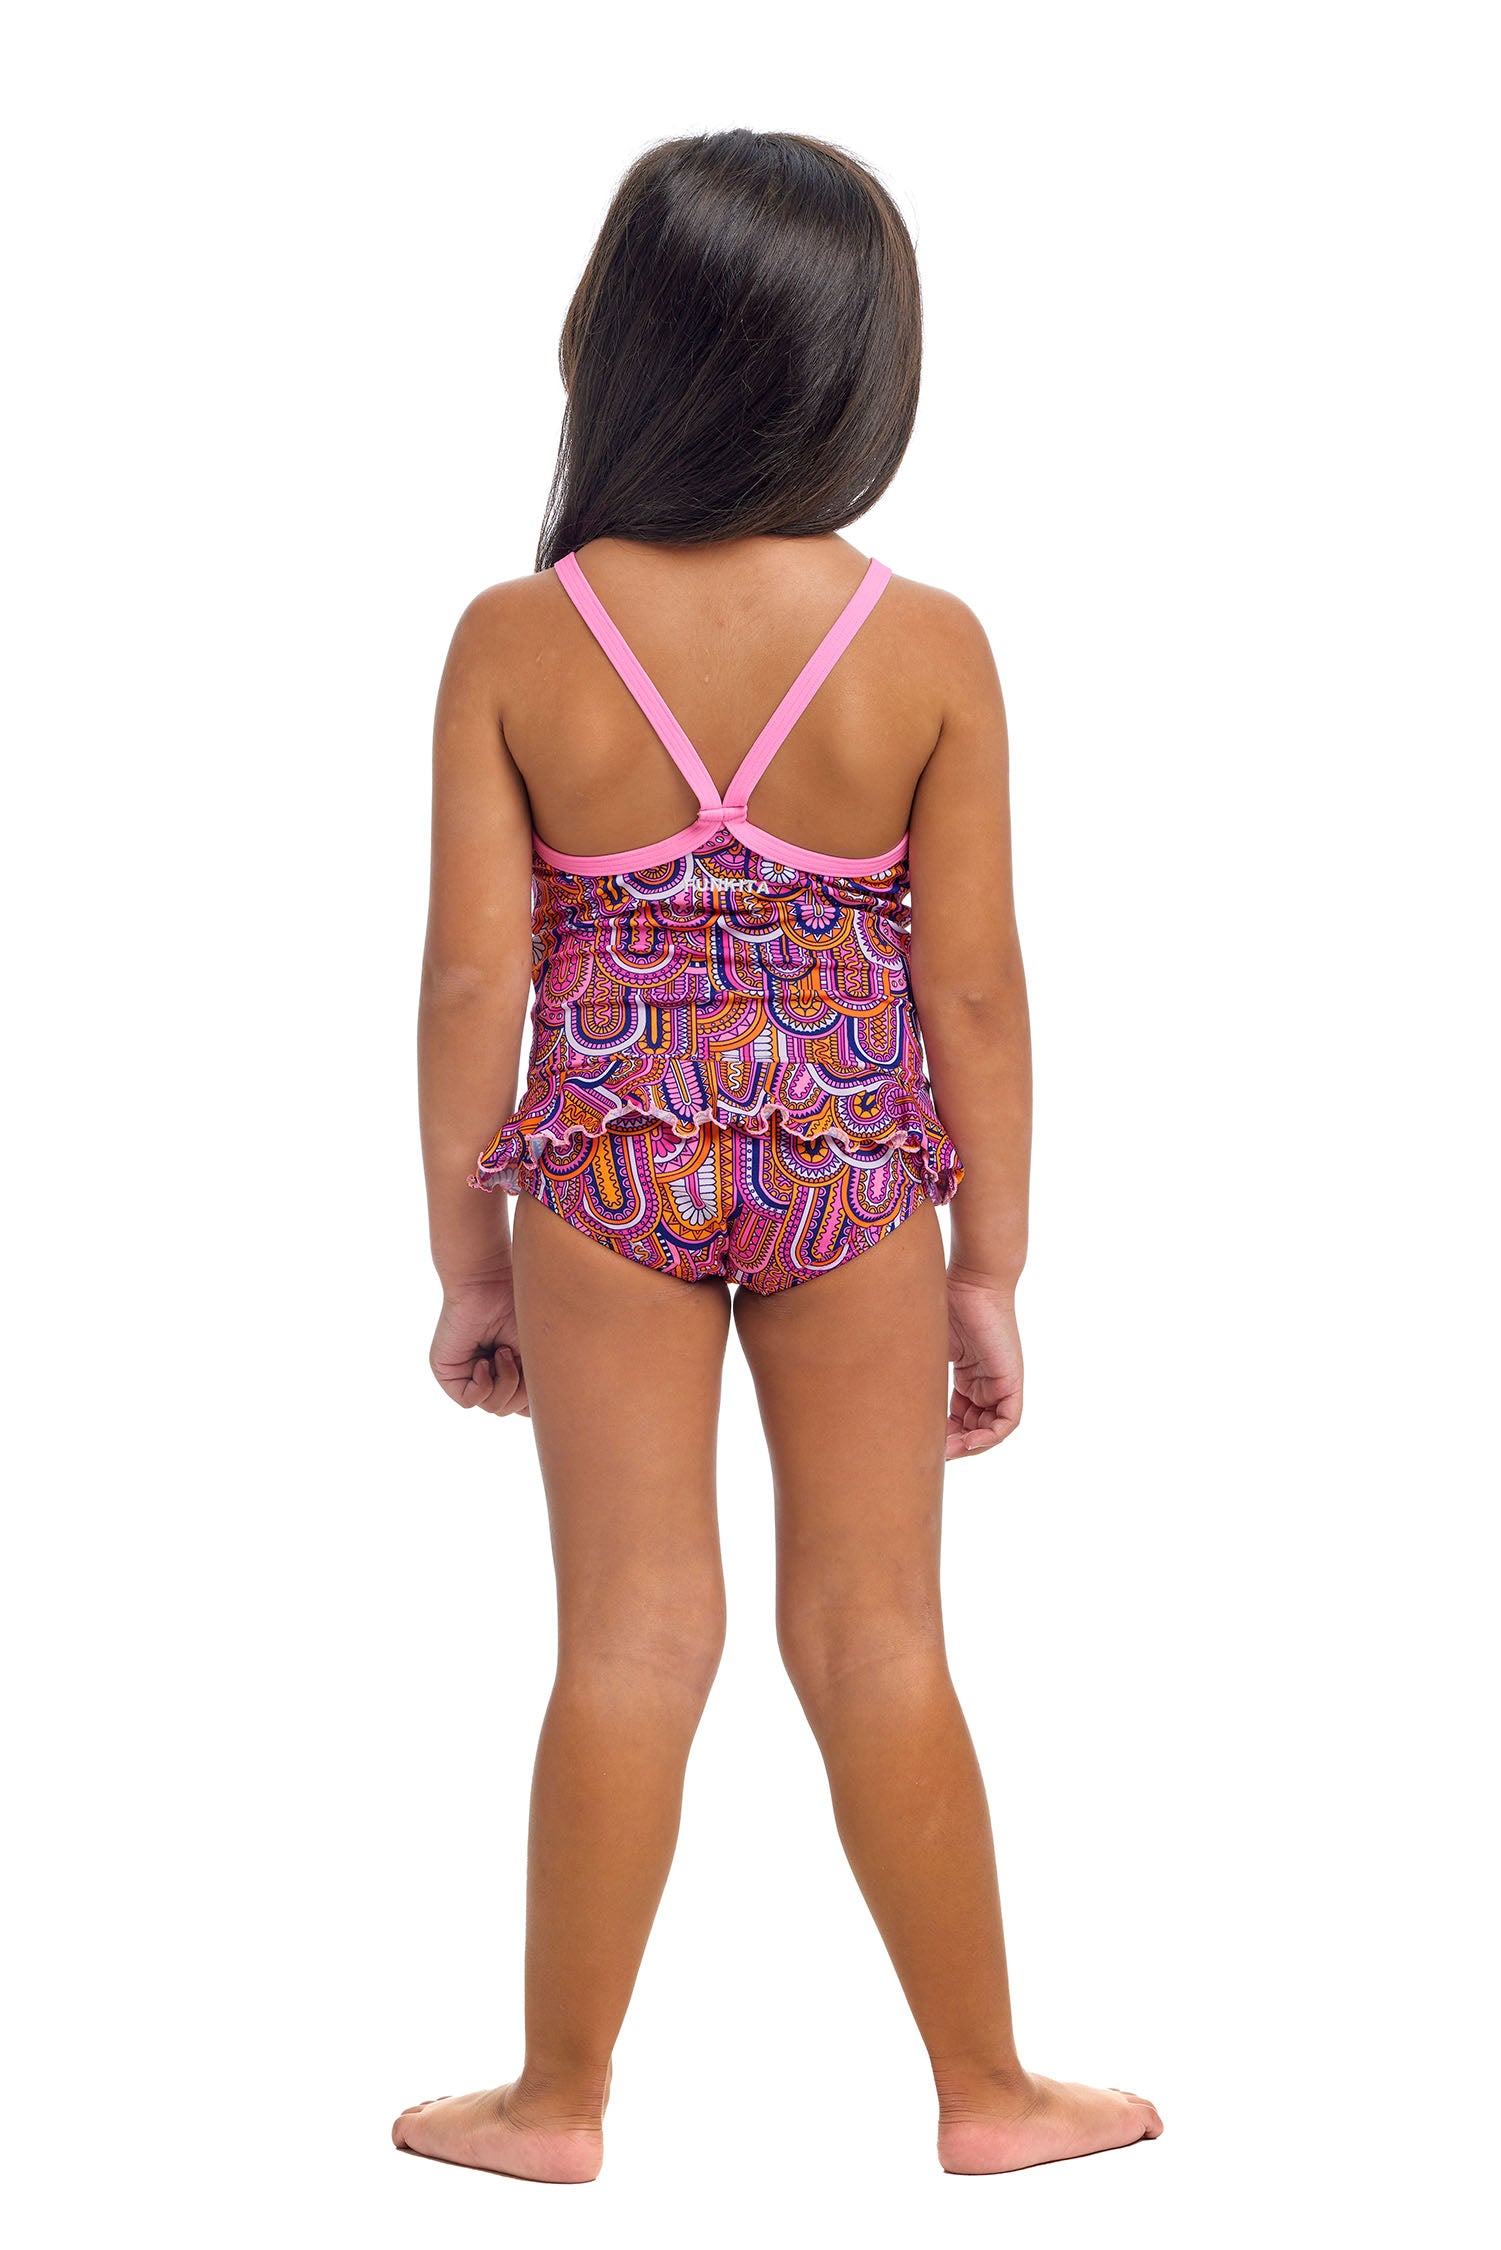 FUNKITA - LEARN TO FLY  TODDLER GIRL'S BELTED FRILL ONE PIECE